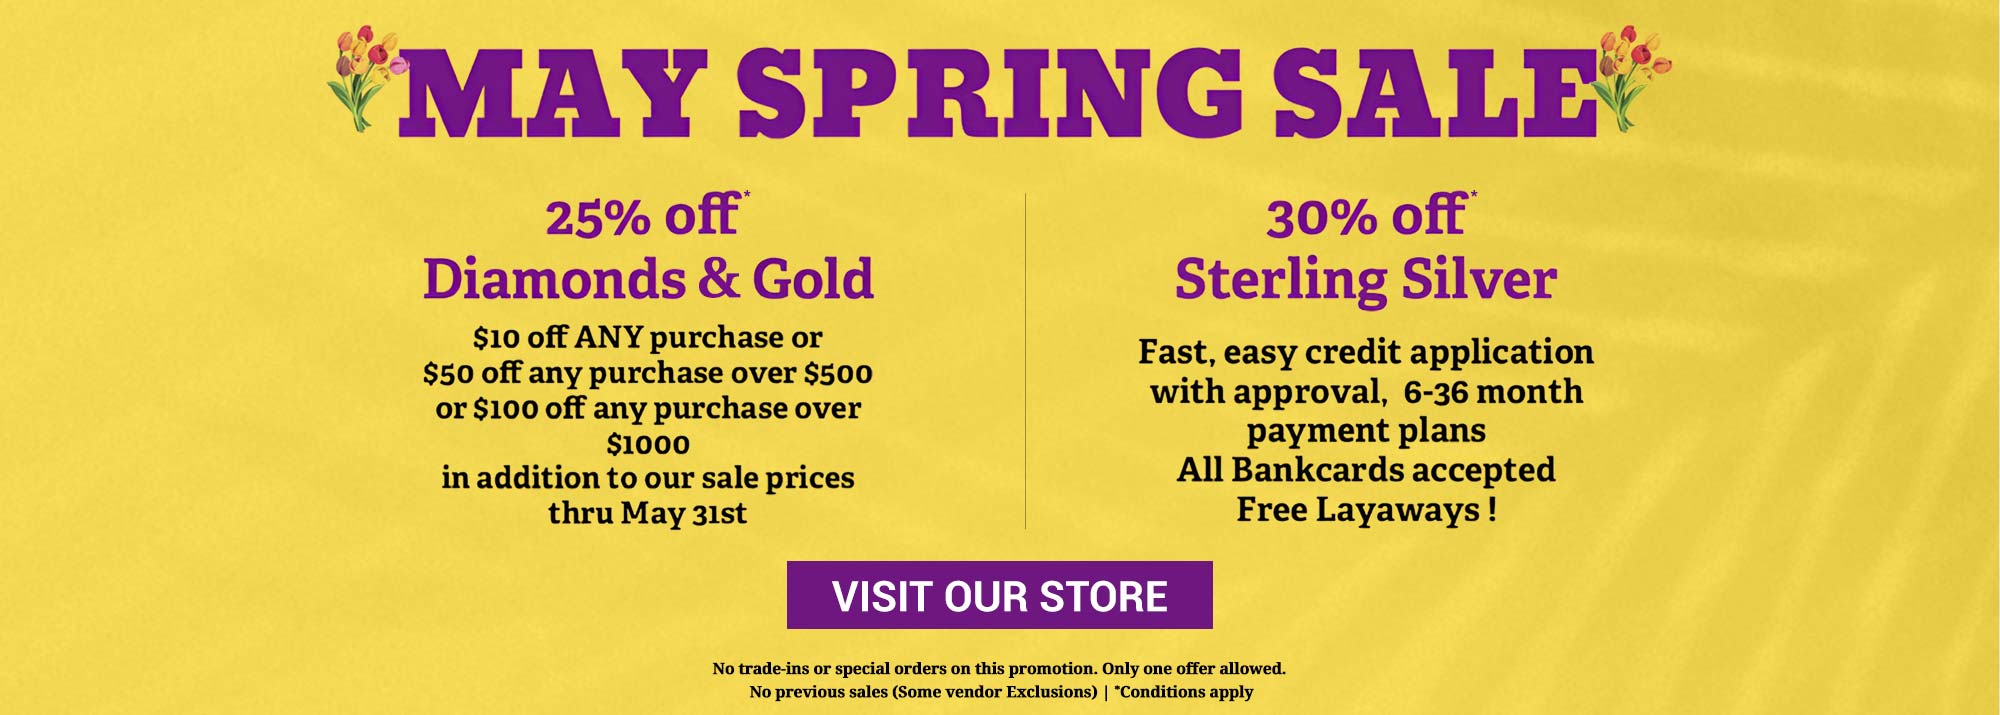 May Spring Sale at Lowery Jewelers